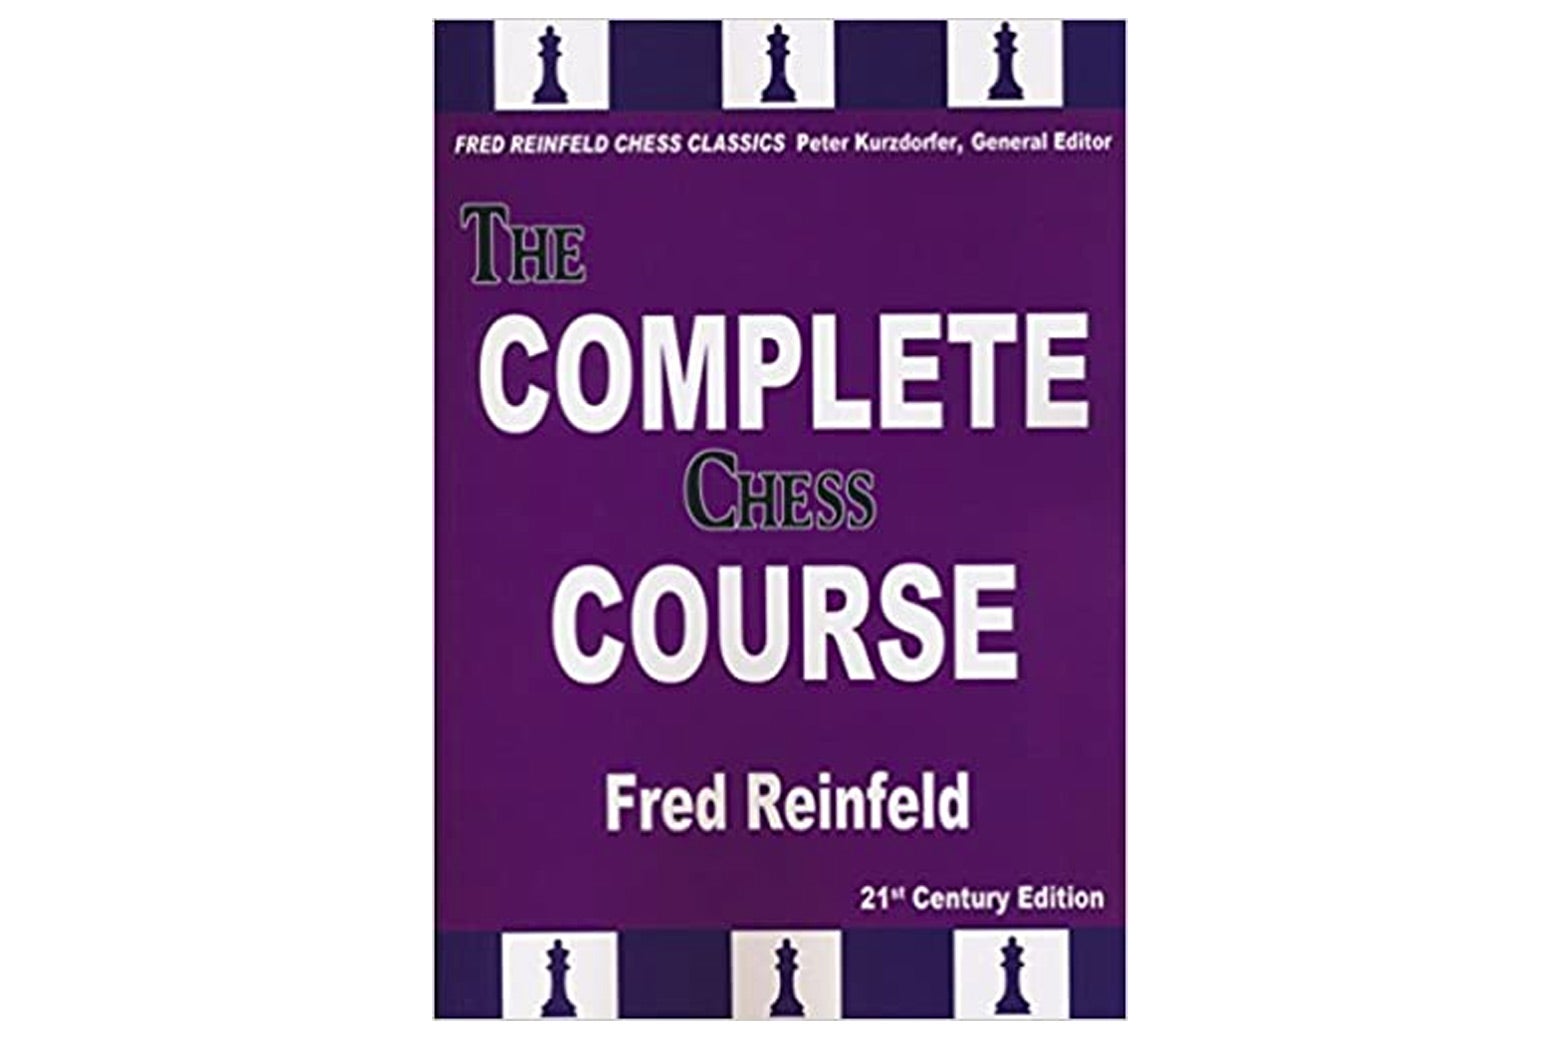 The Complete Chess Course book jacket